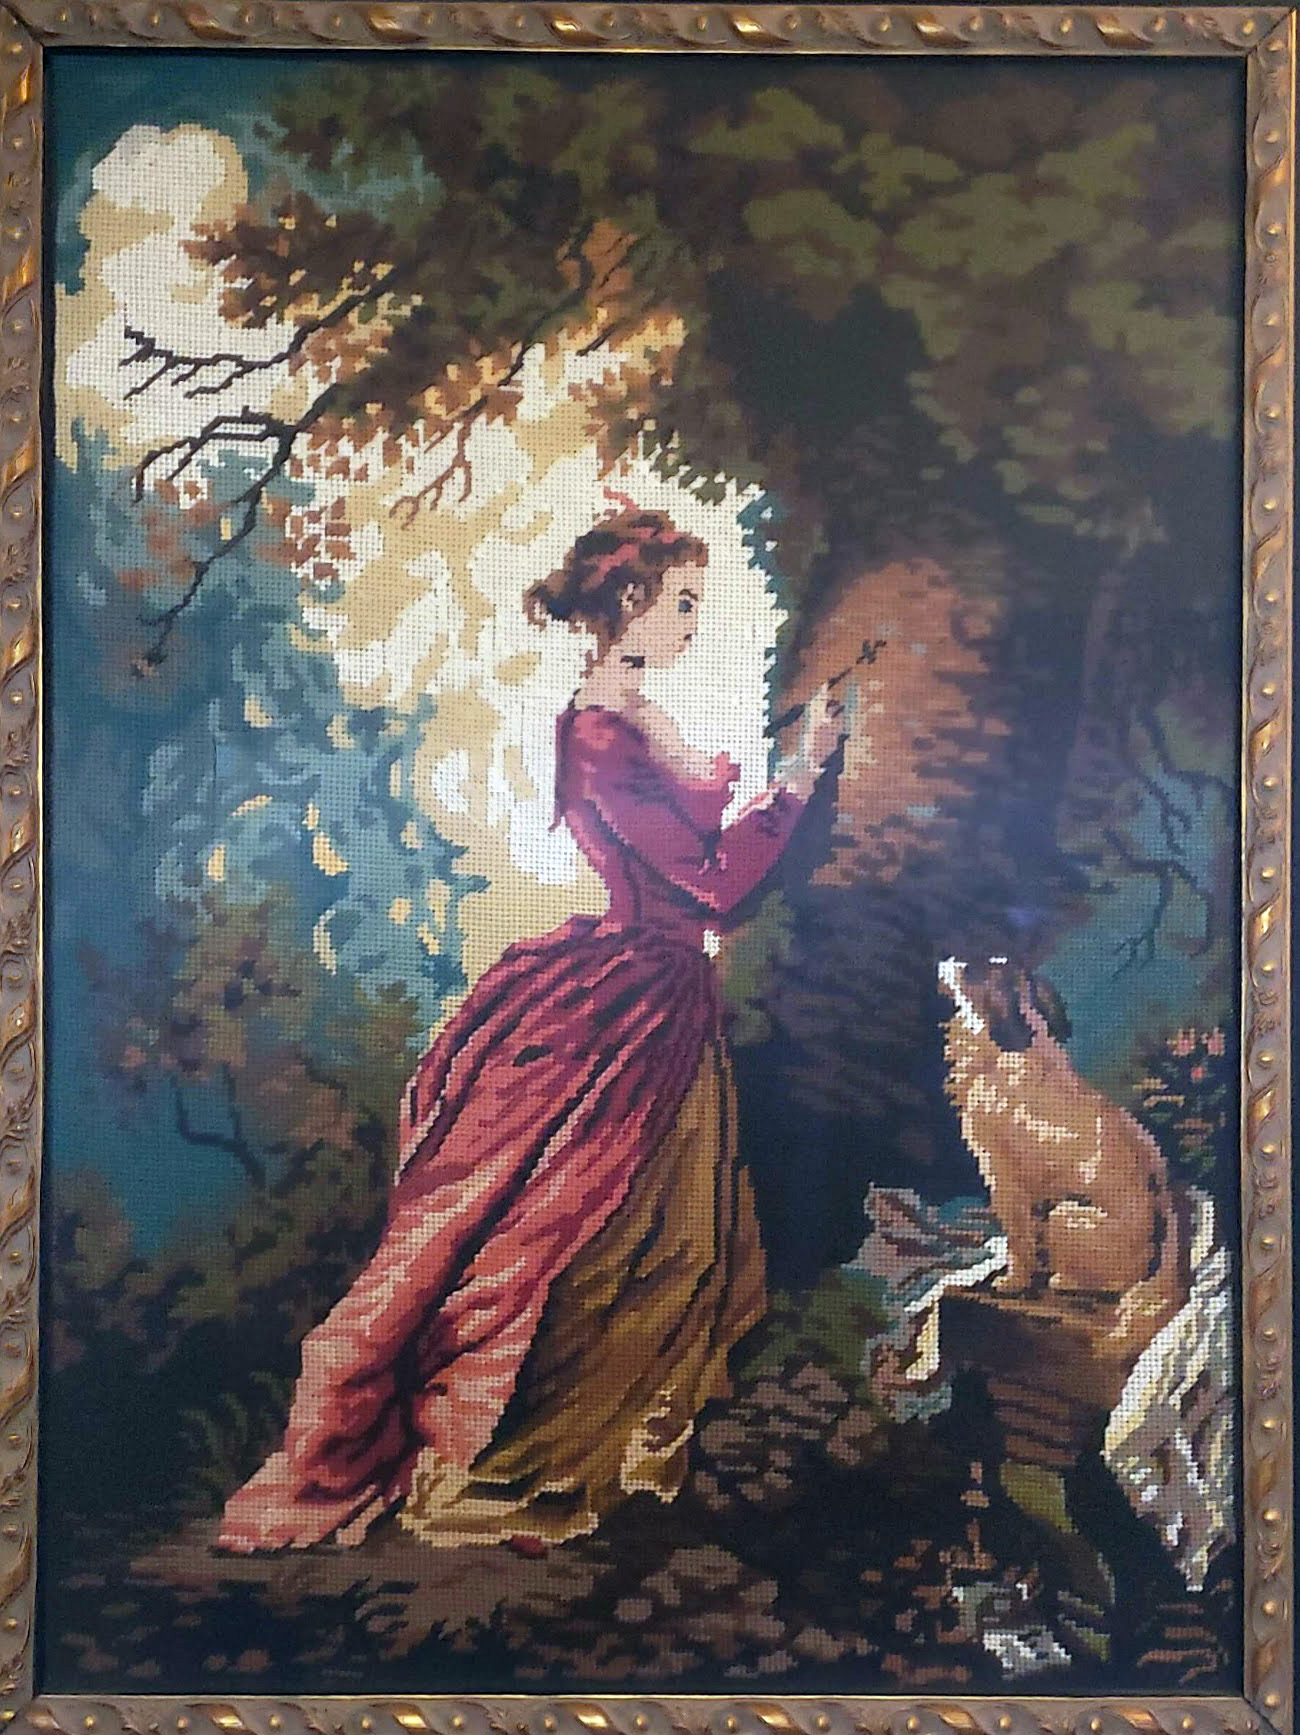 Tapestry of woman in a red dress standing by a tree